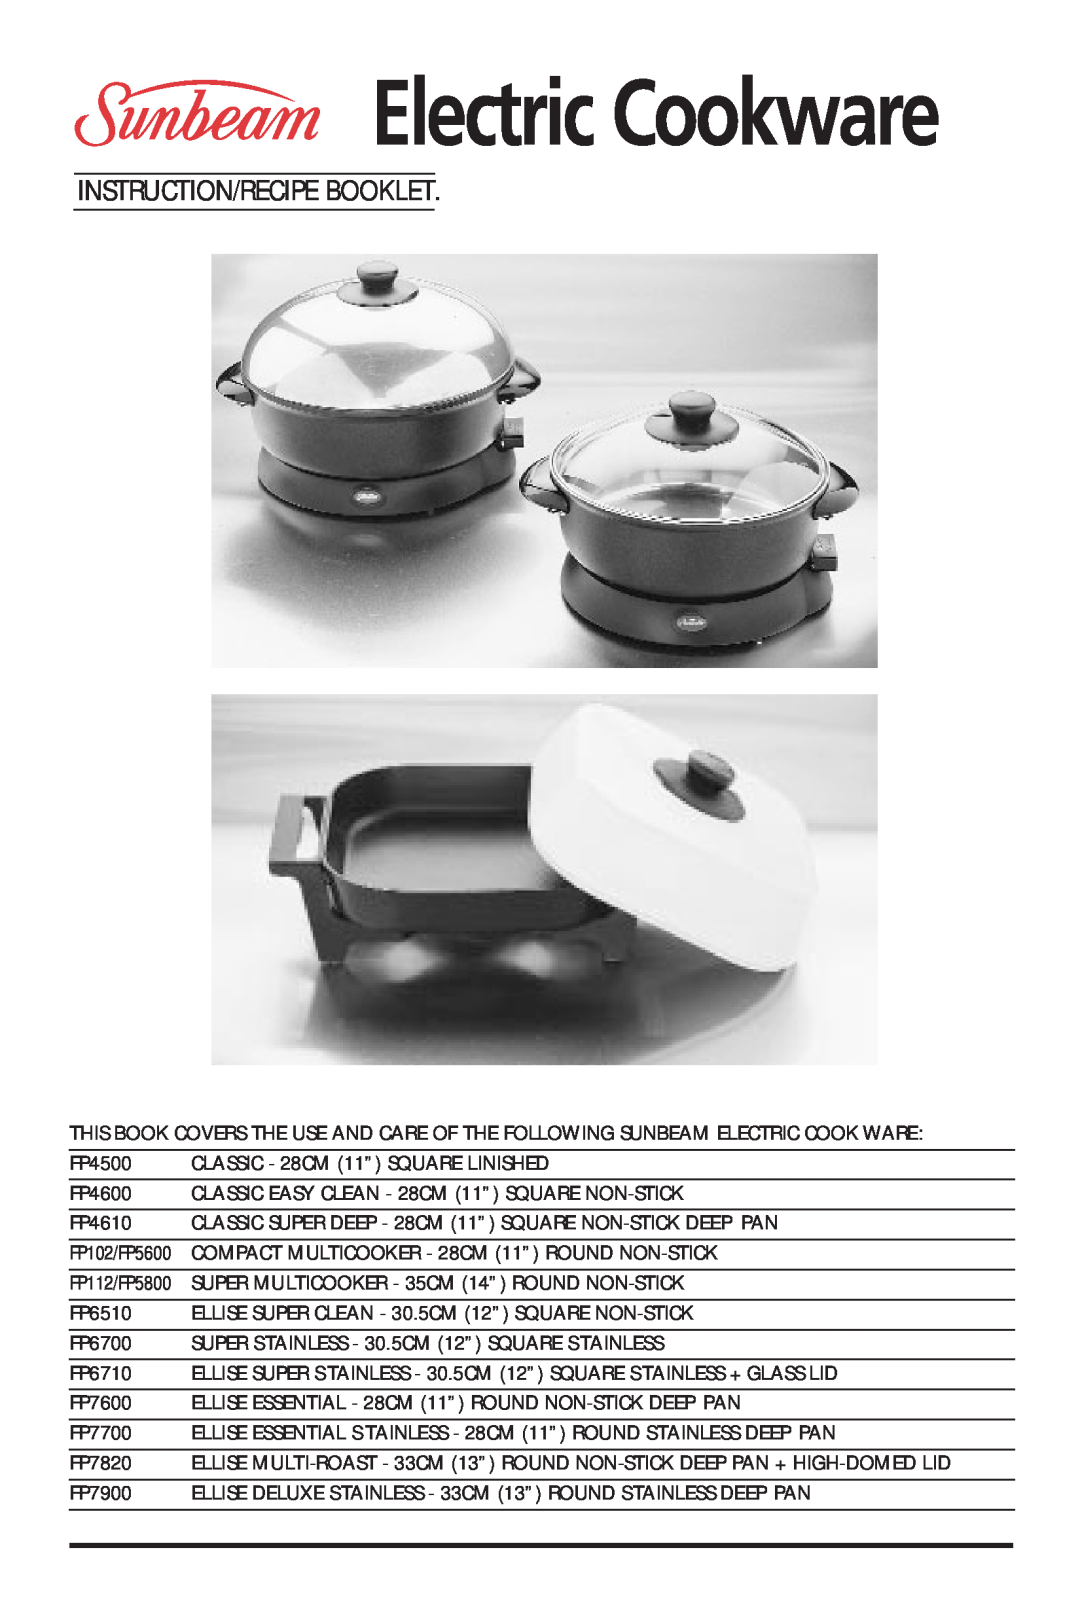 Sunbeam FP6710, FP7820, FP6700, FP7600, FP7700, FP7900, FP4600, FP4610 manual Electric Cookware, Instruction/Recipe Booklet 